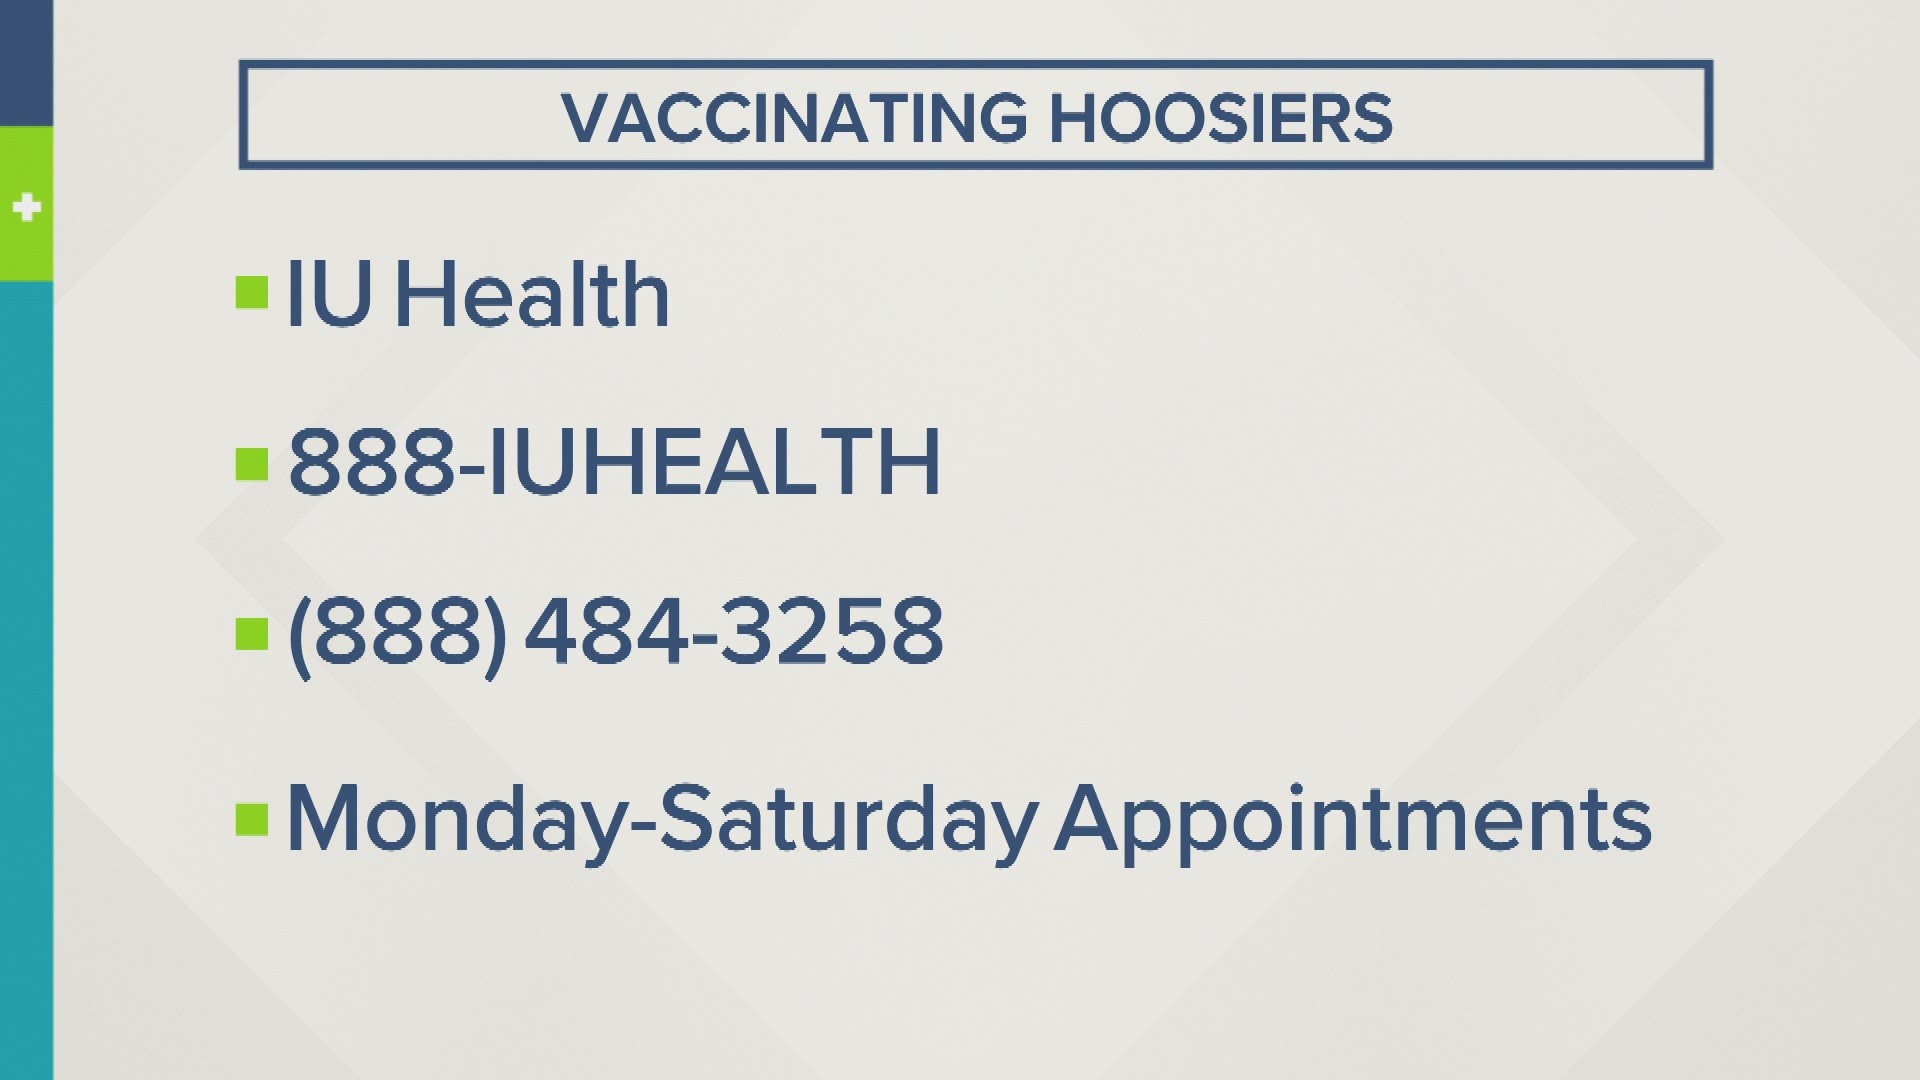 IU Health will partner with Lyft and other transportation services to get Hoosiers to vaccination appointments around the state.